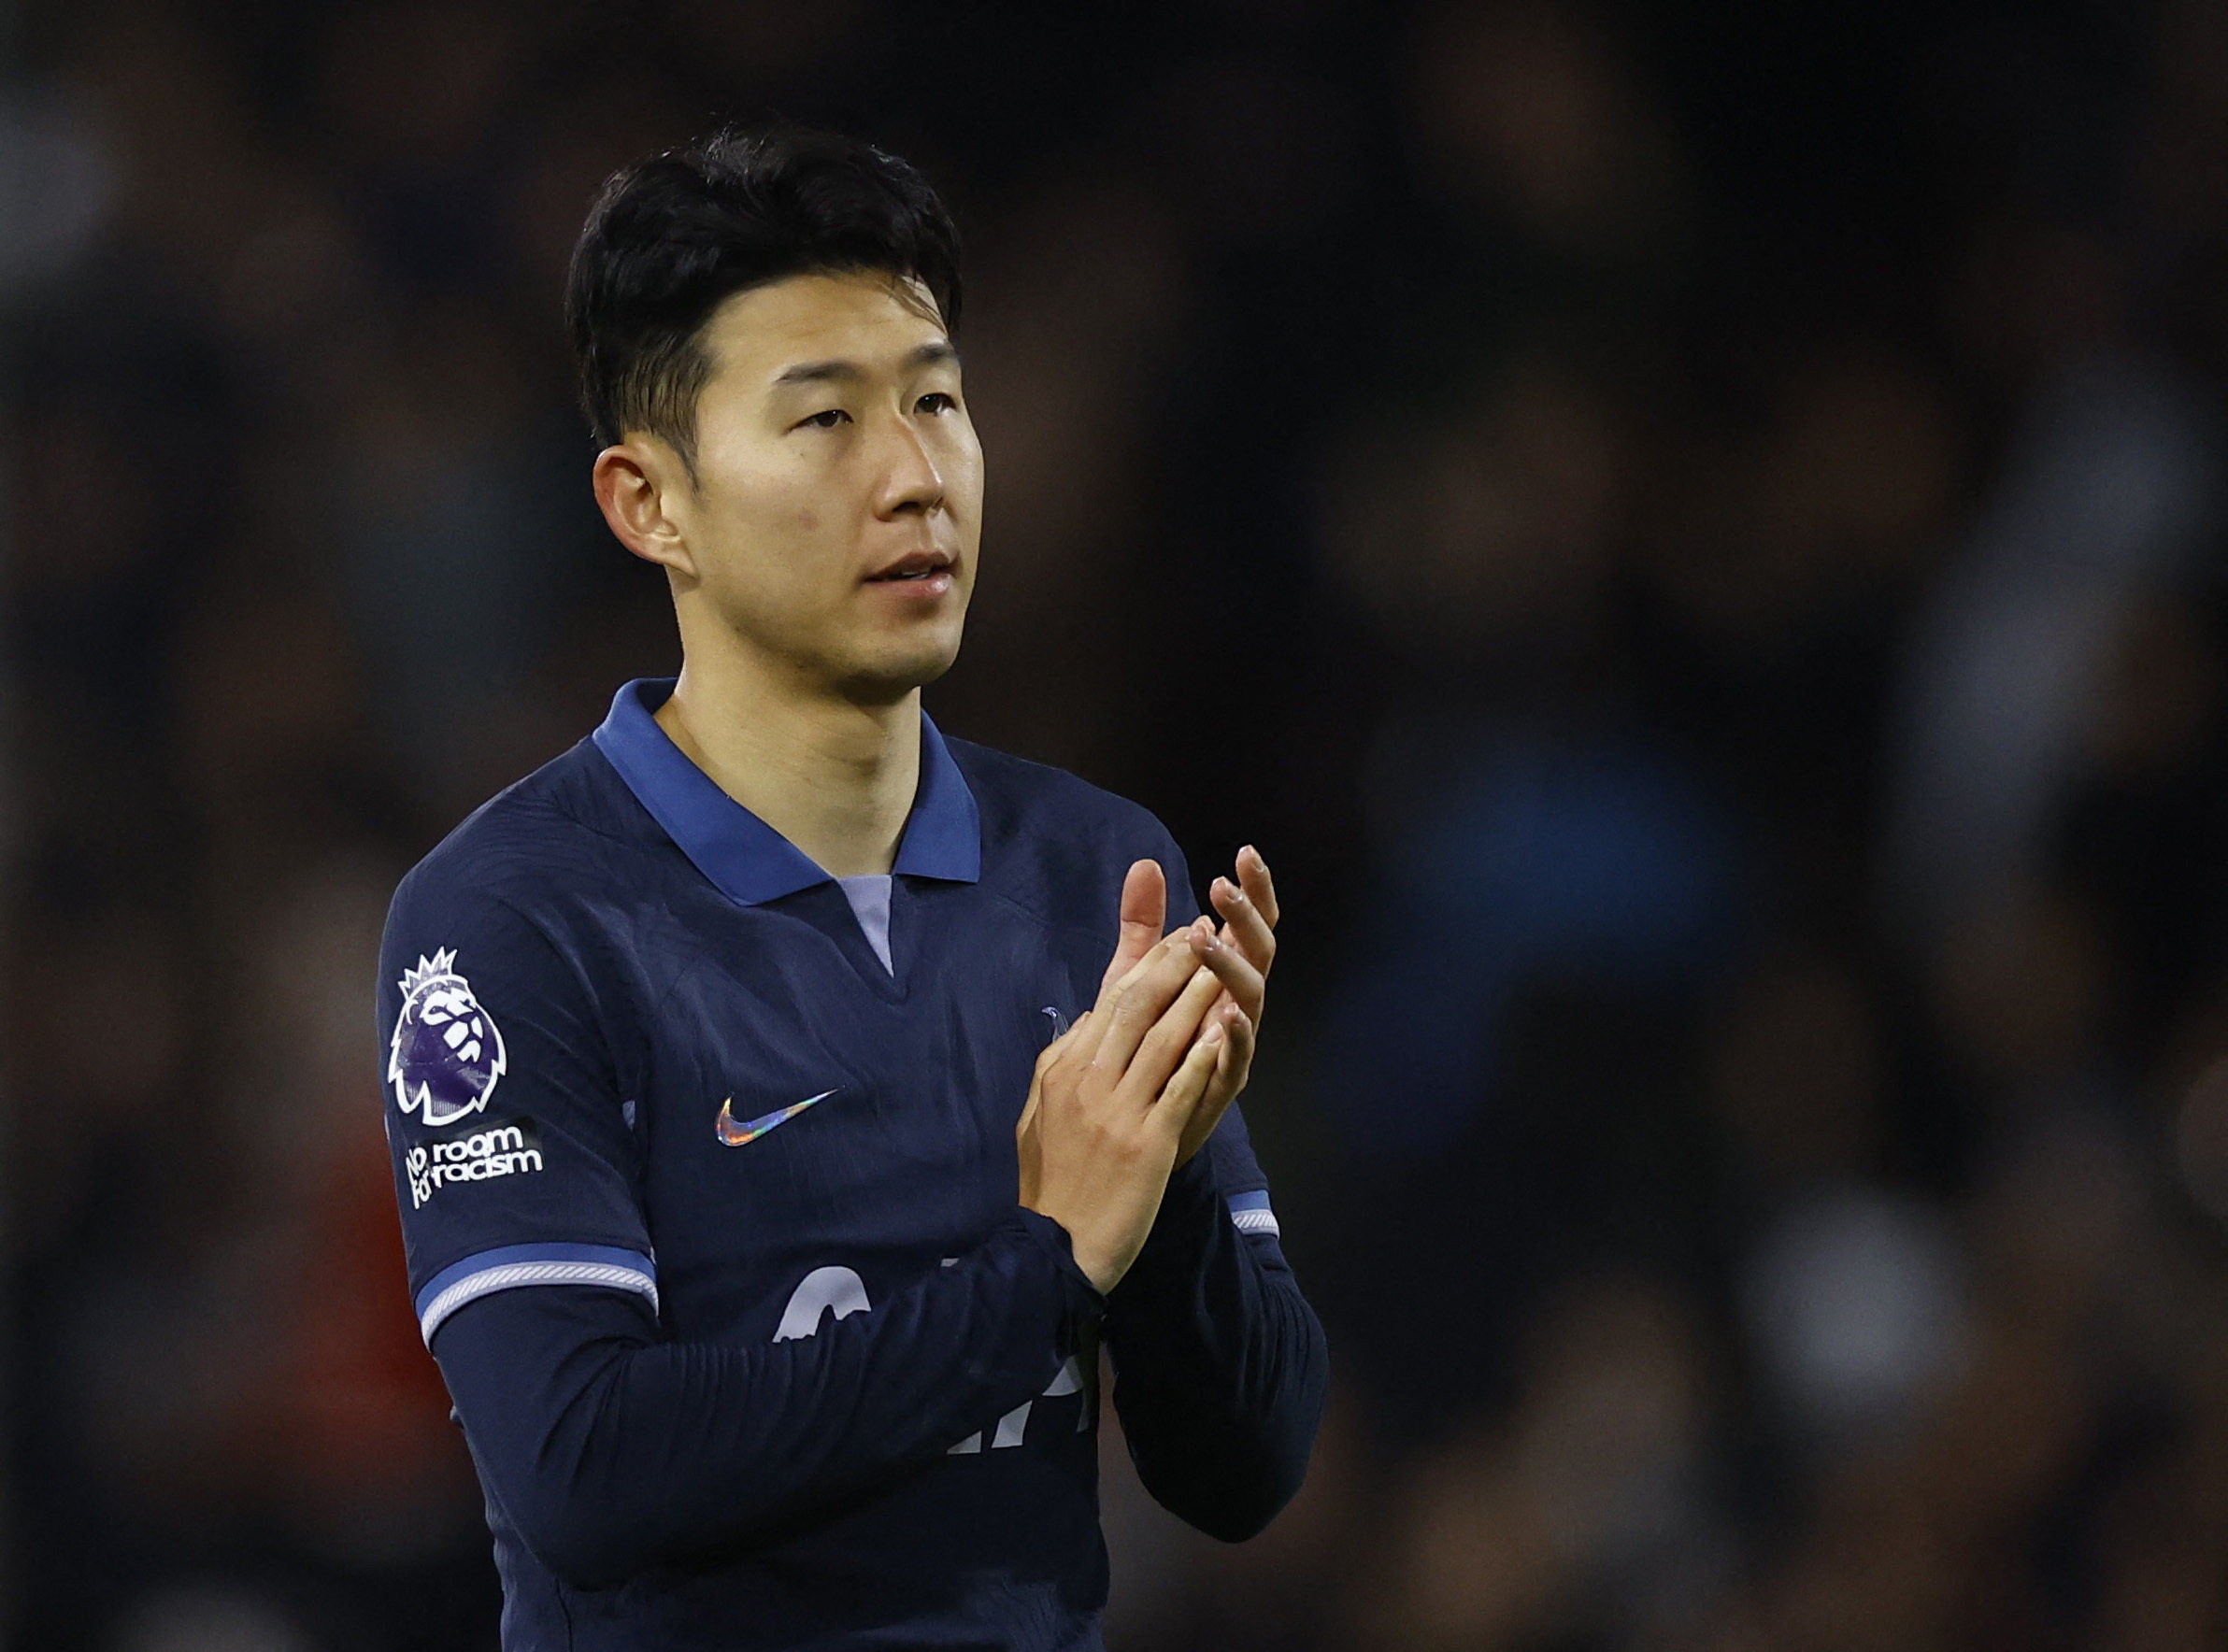 Tottenham Hotspur’s Son Heung-min is back on international duty as South Korea continue their World Cup qualifying campaign. Photo: Reuters